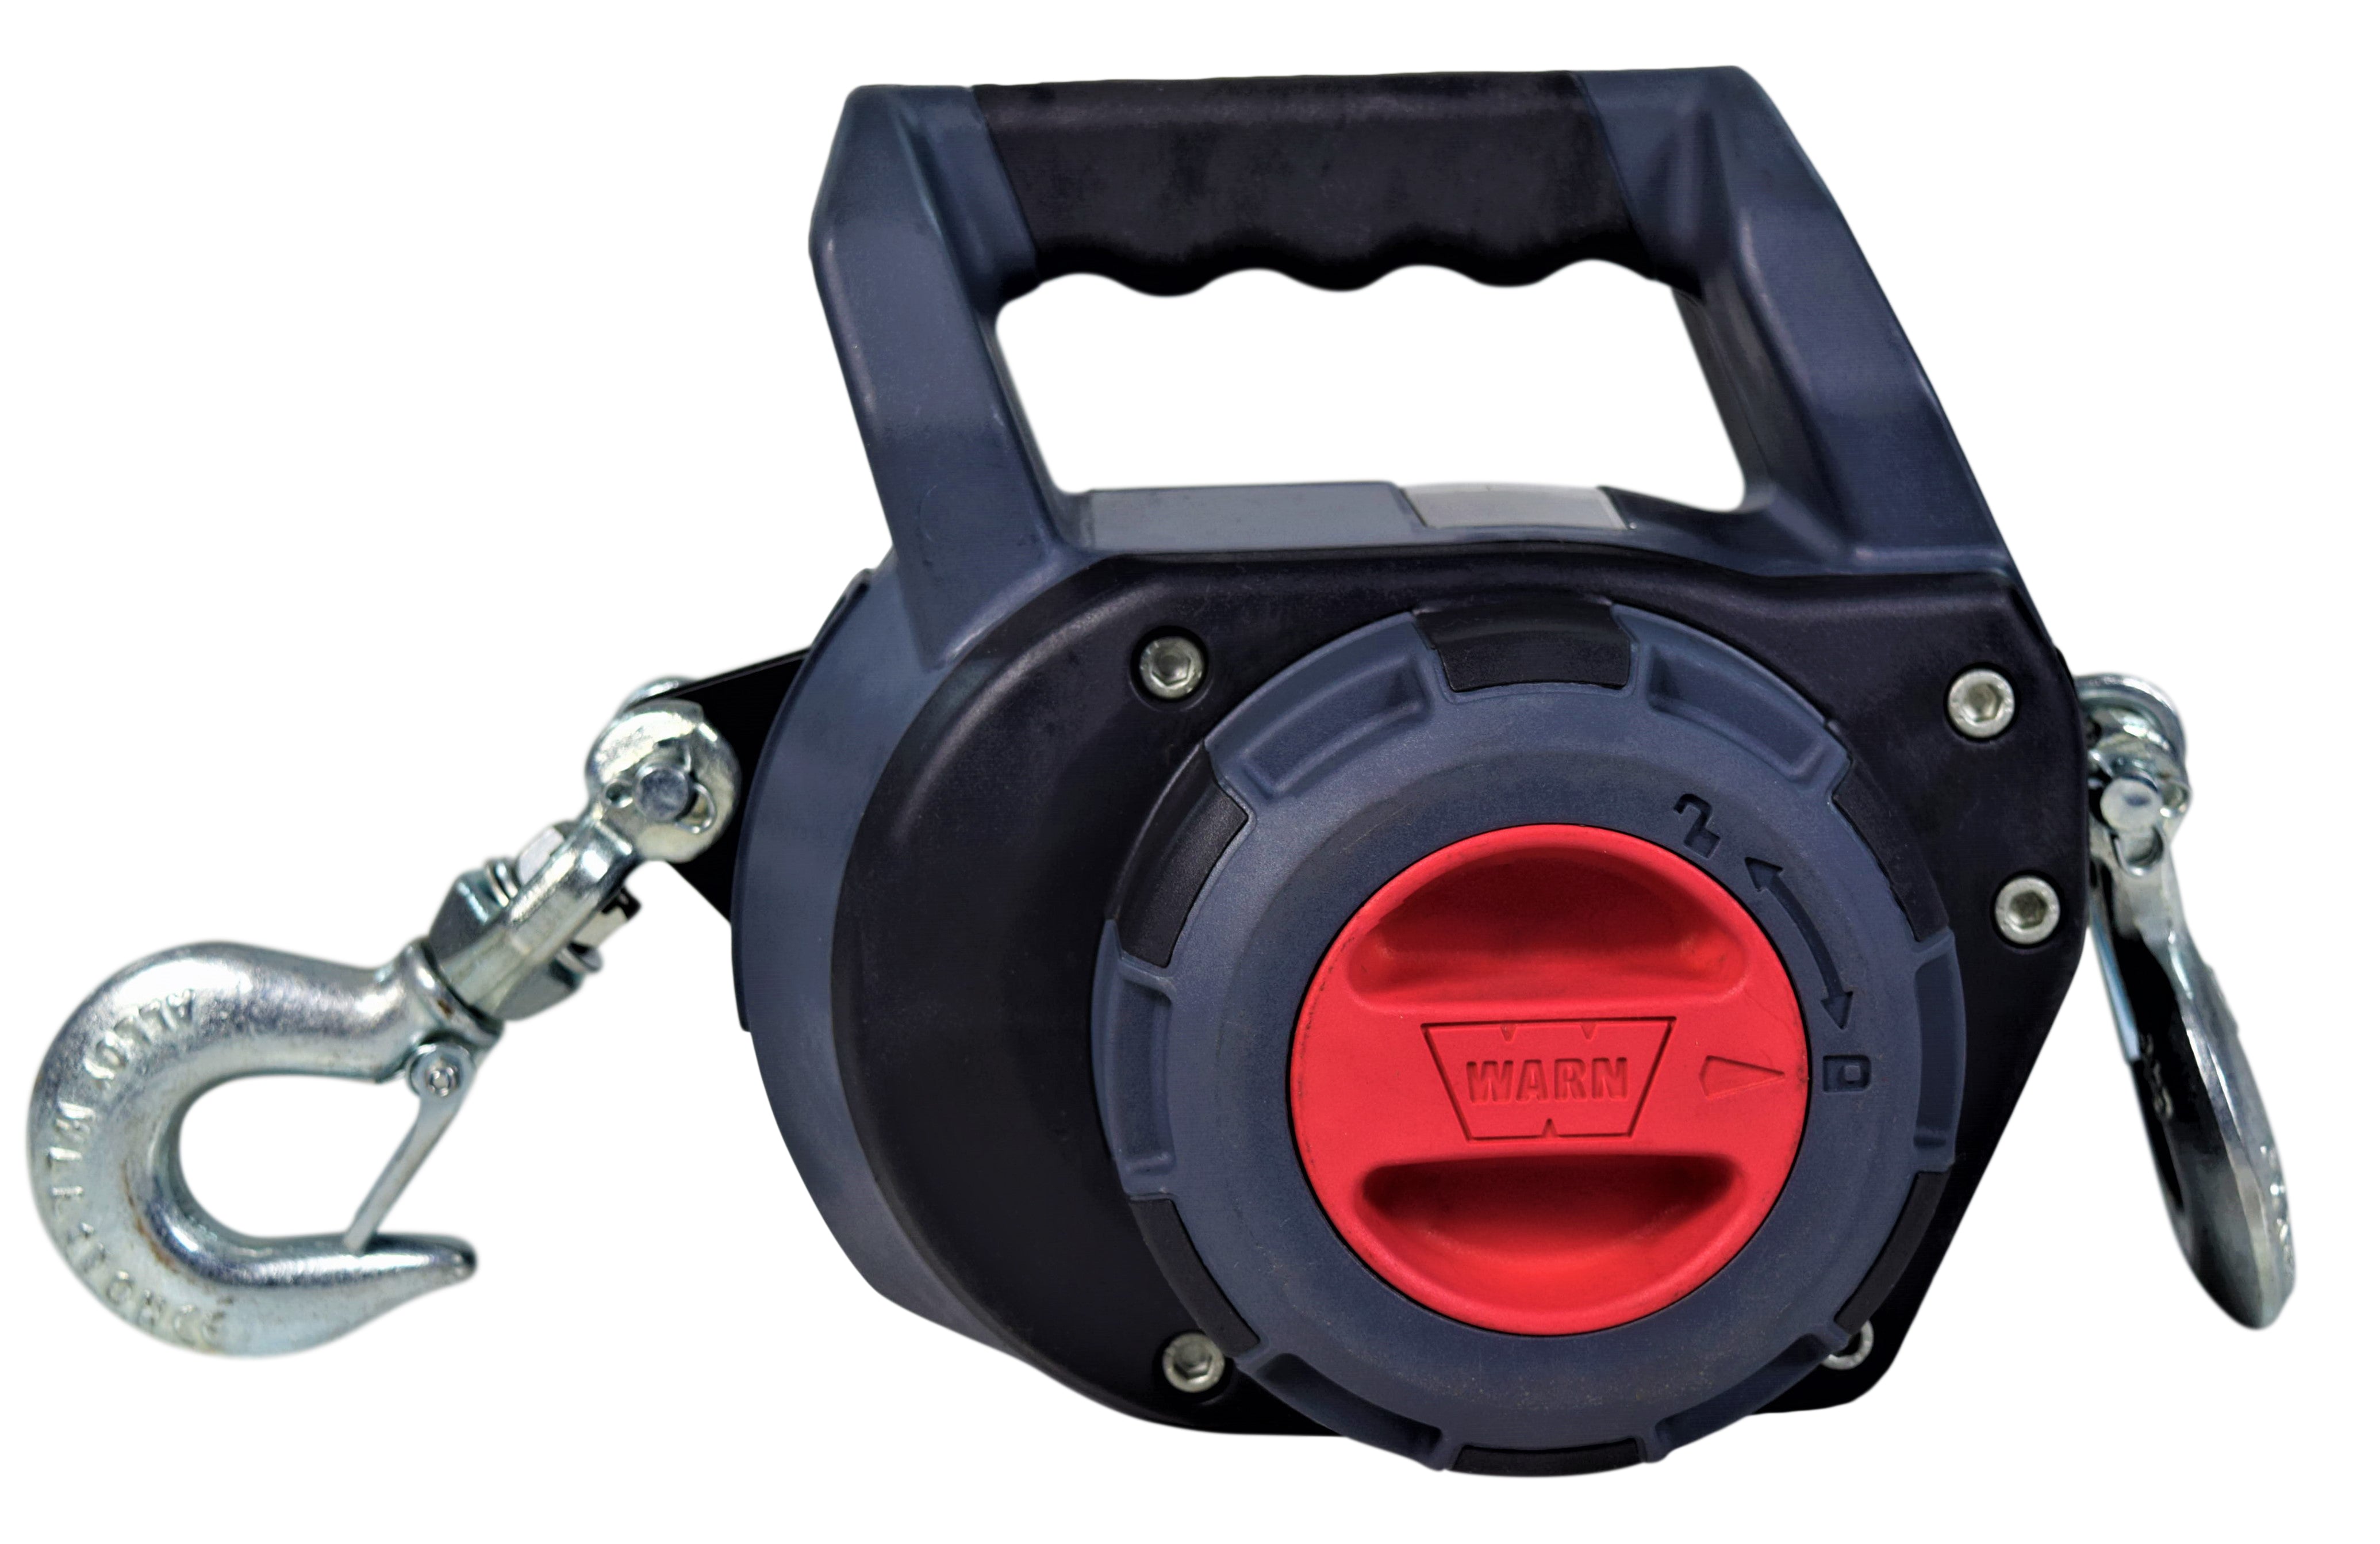 Warn-101575-Drill-Winch-750-lbs-Capacity-40-Synthetic-Rope-Free-spool-Clutch-image-3